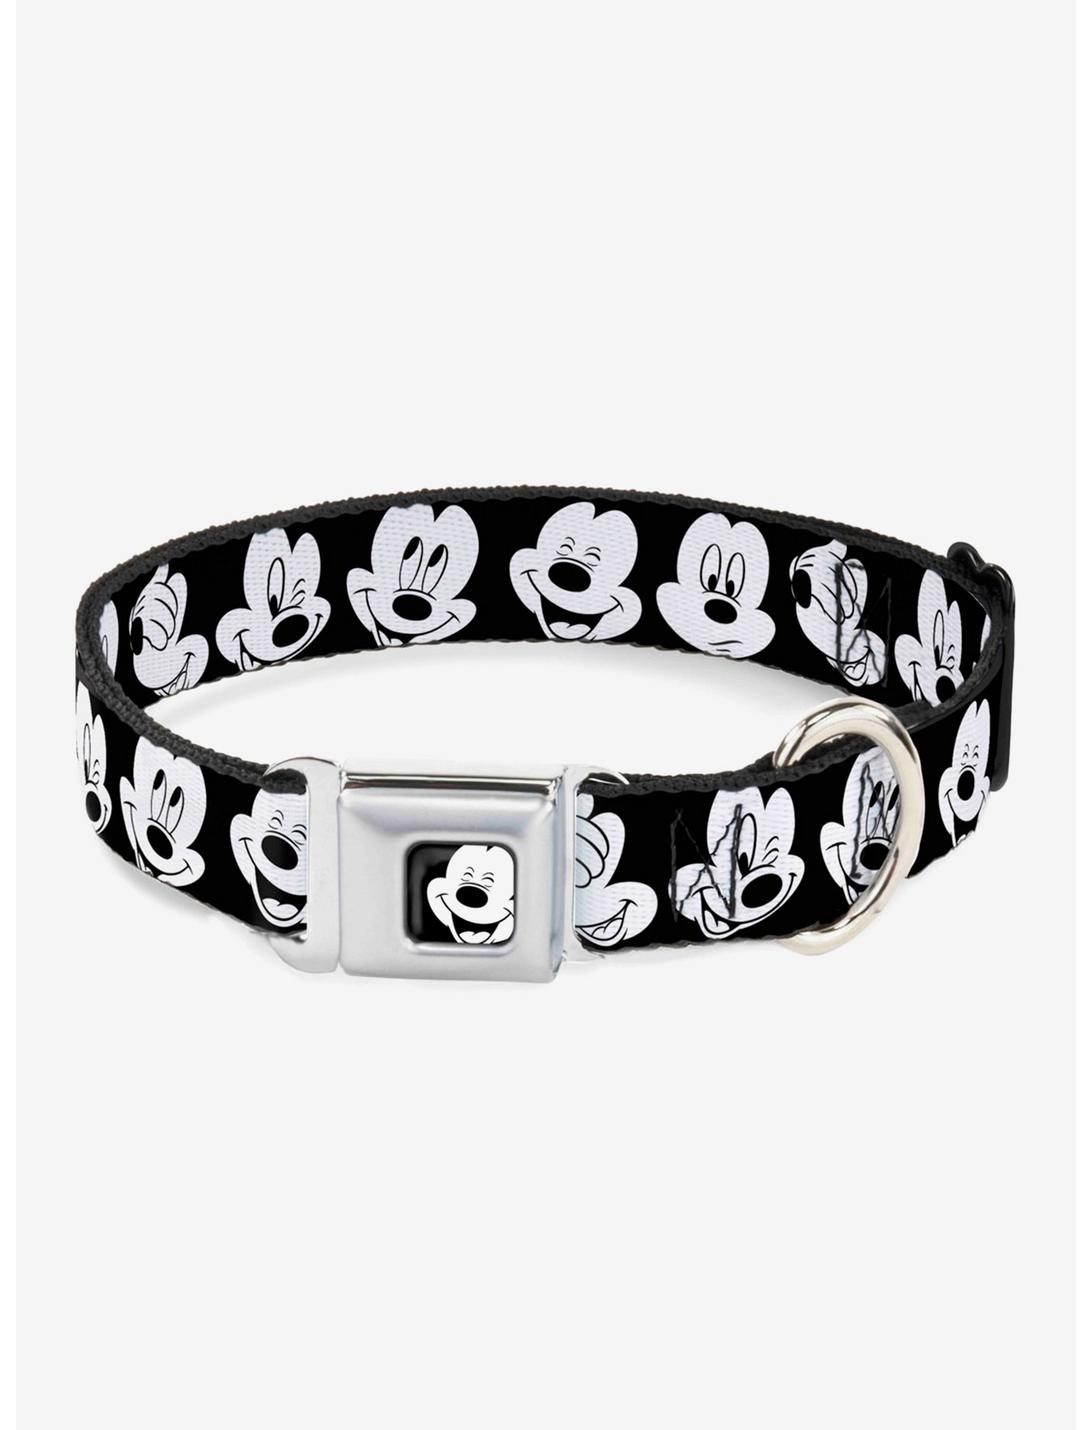 Disney Mickey Mouse Expressions Close Up Seatbelt Buckle Dog Collar, BLACK  WHITE, hi-res